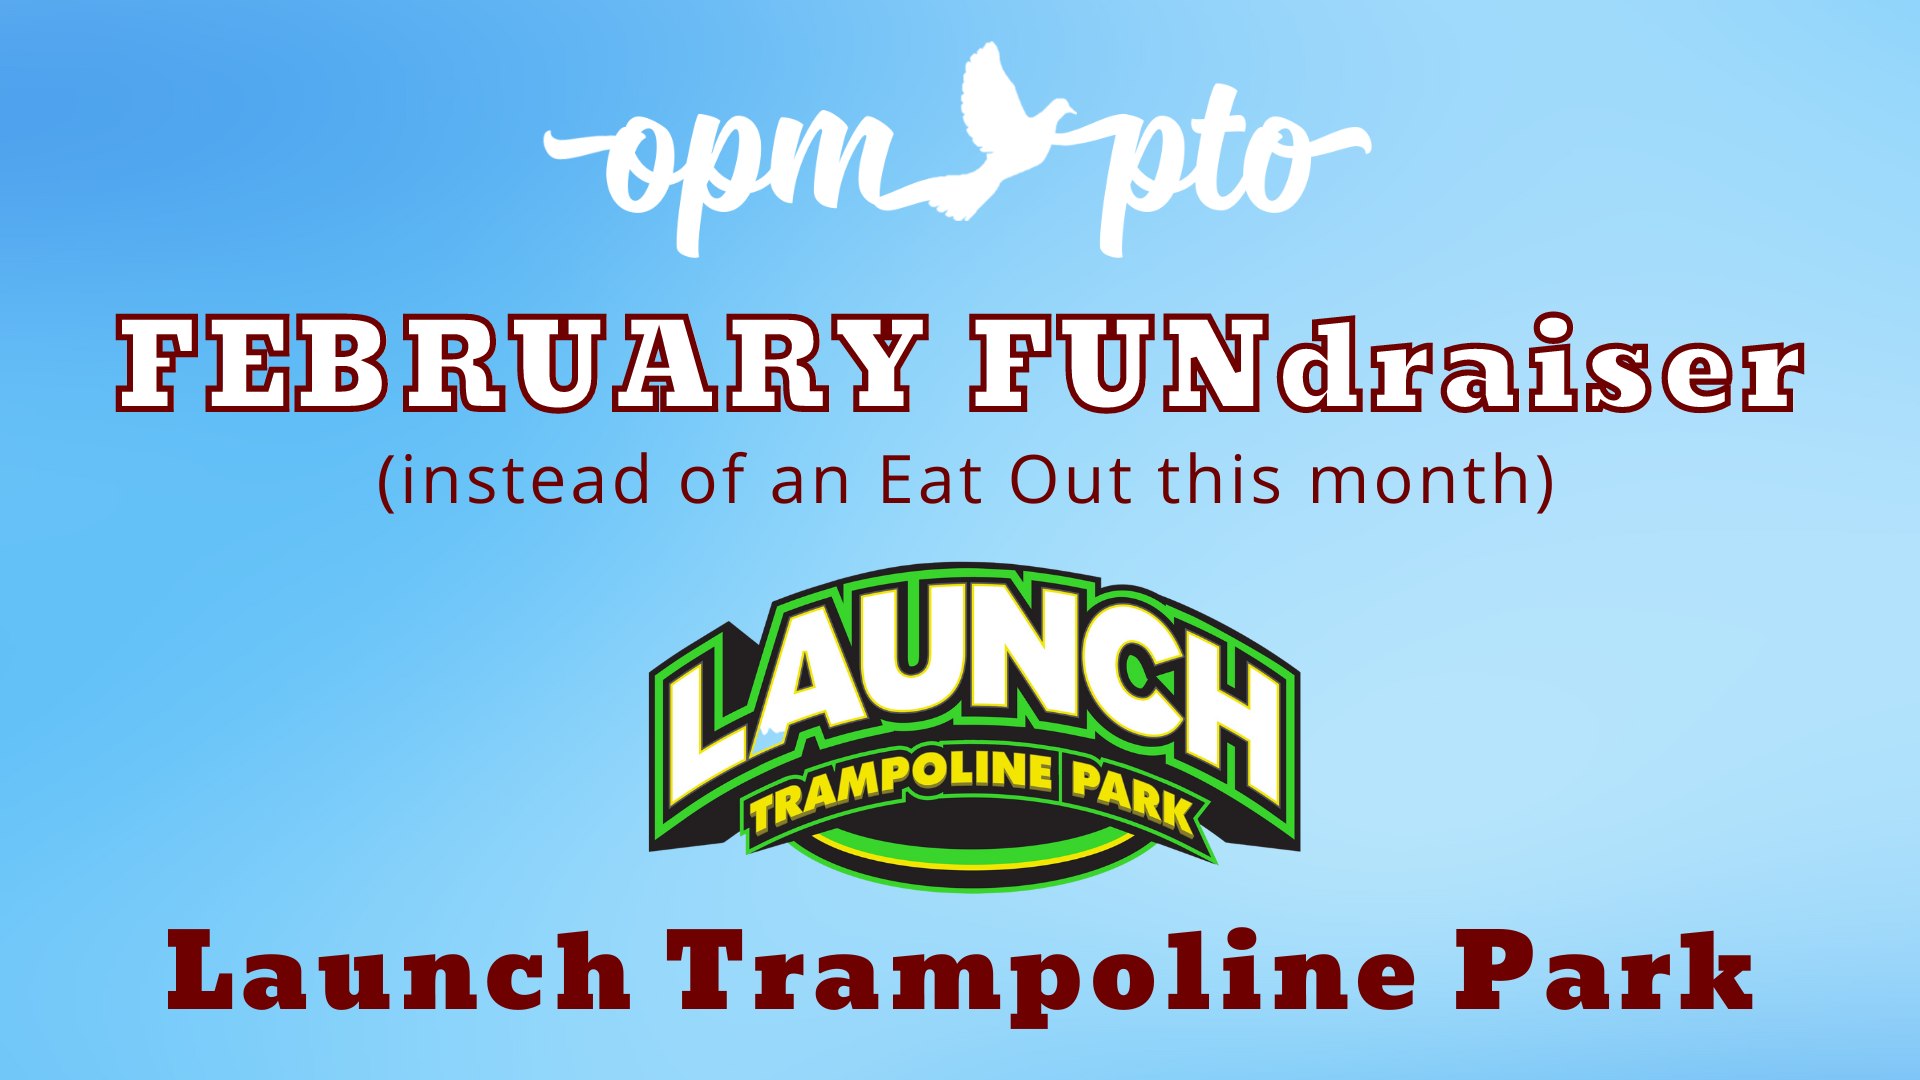 February FUNdraiser at Launch Trampoline Park